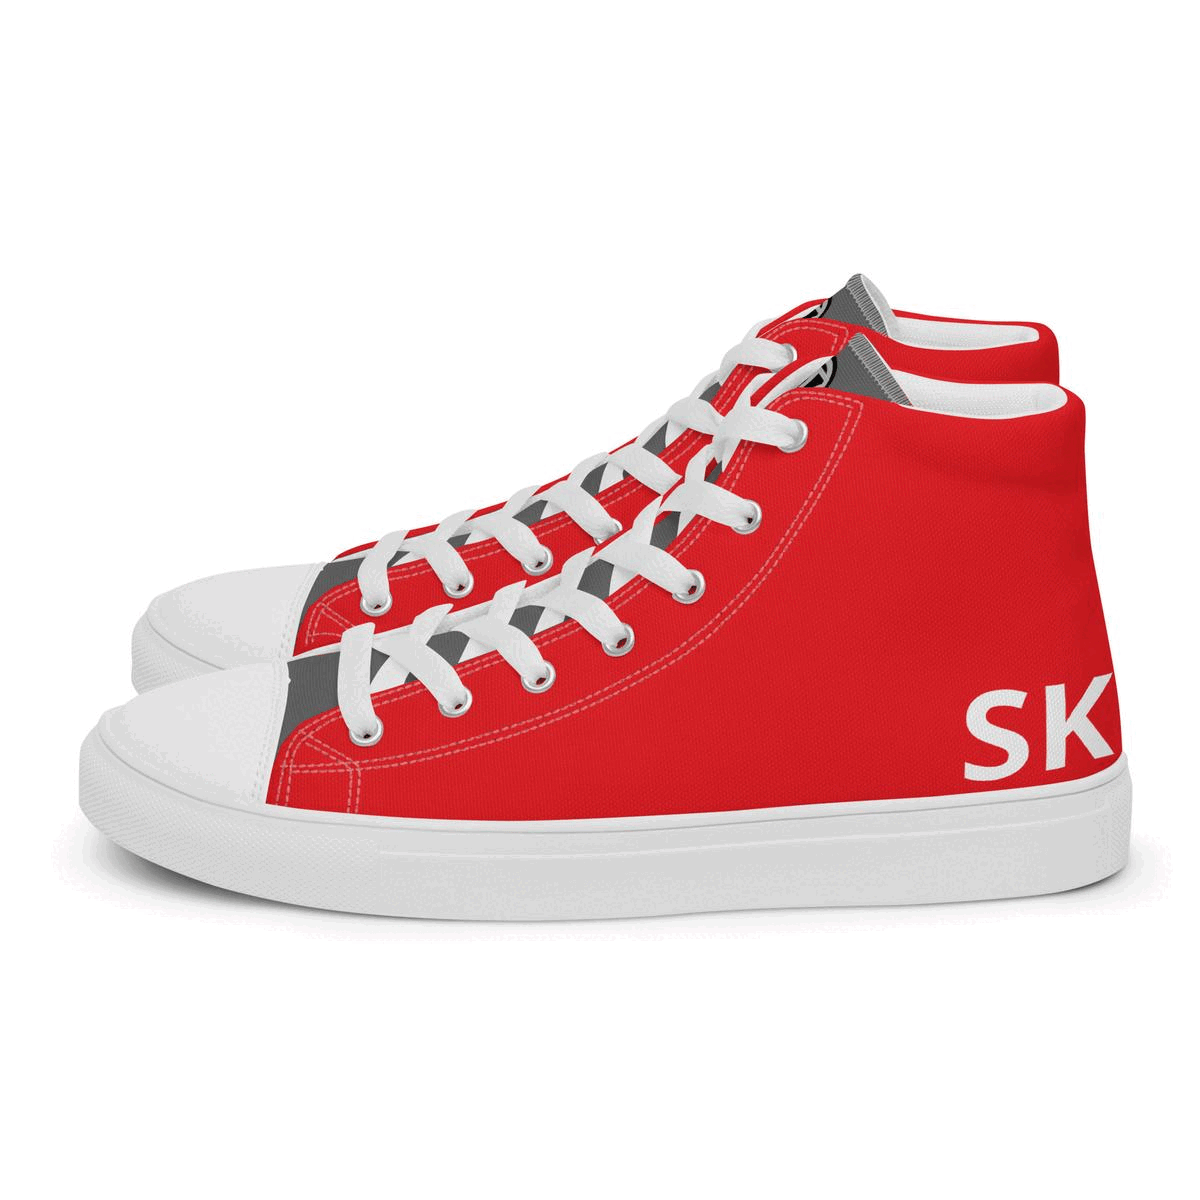 TIME OF VIBES - Men’s High Sneaker MyVIBES + Initials - €189.00